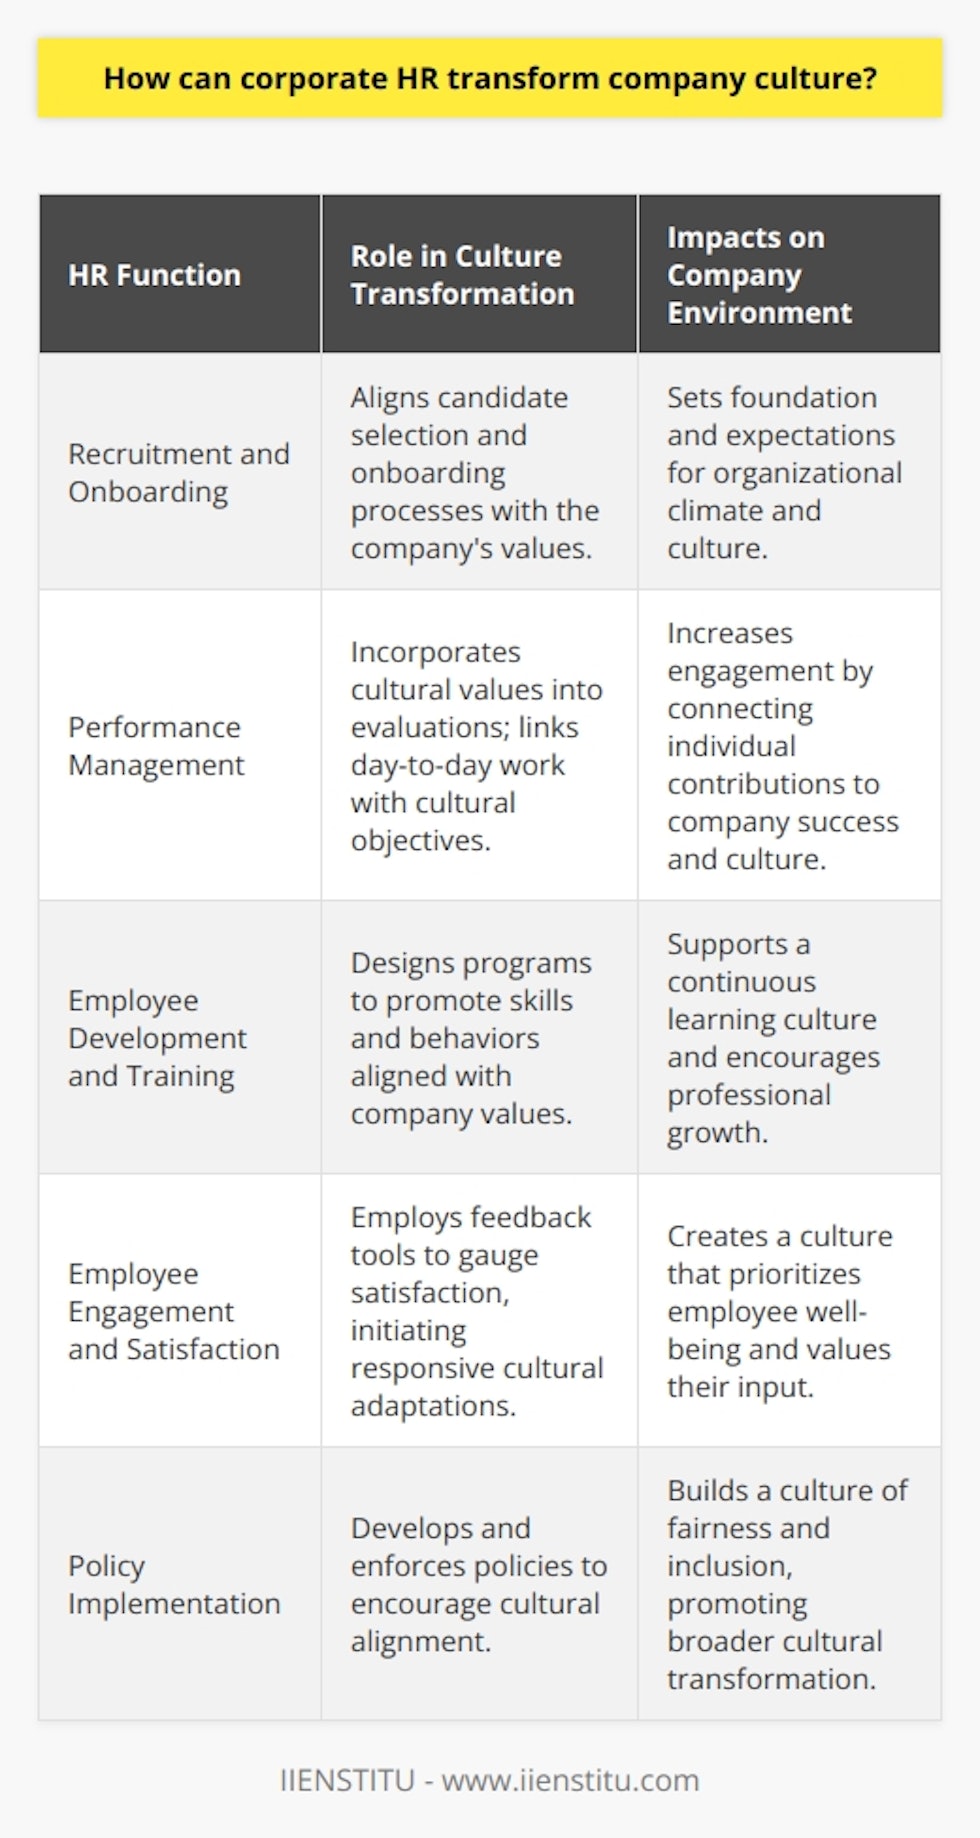 Corporate Human Resources (HR) departments are keystones in driving and transforming company culture, acting as the bridge that connects an organization's strategic vision with its employee practices. By effectively managing several facets of the employee lifecycle, HR professionals can cultivate an environment that reflects the core values and aspirations of the company, leading to an improved workplace.**Recruitment and Onboarding: Shaping the Initial Experience**Recruitment efforts set the tone for company culture. HR is in a unique position to infuse the company's values into the employee's first experiences. By aligning recruiting strategies with cultural objectives, HR ensures that candidates not only possess the necessary skills but also the attitude and work ethic that complement the organizational climate. Onboarding plays a crucial role, too, as it offers a structured introduction to the company's culture and expectations, establishing a strong foundation for new joiners and reinforcing the collective identity.**Performance Management: Aligning Goals and Culture**HR's design of performance management systems is instrumental in driving culture. By integrating cultural values into performance appraisals and feedback mechanisms, HR connects the day-to-day work with broader cultural goals. When employees understand how their individual contributions affect the company's success and culture, they are more engaged and motivated. Performance reviews offer the chance to celebrate not just what is achieved but also how it's achieved, emphasizing the behavioral norms of the organization.**Employee Development and Training: Investing in a Growth Mindset**HR's ability to identify and nurture employees' potential through tailored training and development initiatives can greatly reinforce a culture of continuous improvement and learning. Development doesn't happen by accident; it necessitates a conscious effort to align opportunities with cultural attributes. HR acts as a curator for training programs that promote desired skills and behaviors, such as collaboration, innovation, and leadership styles that resonate with the company's core values.**Employee Engagement and Satisfaction: The Feedback Loop**Employee engagement is a critical piece of the cultural puzzle. By measuring and responding to employee satisfaction through surveys and feedback tools, HR creates a responsive culture that values employee input and demonstrates a commitment to their well-being and professional growth. This feedback loop is a powerful mechanism for identifying cultural pain points and areas where the company could evolve to better meet the needs of its workforce.**Policy Implementation: Enacting Cultural Change**HR policies, when well-conceived and fairly implemented, act as the guardrails for company culture. These policies, including work flexibility, recognition programs, and diversity initiatives, can all be catalysts for cultural transformation. By ensuring these policies reflect the spirit of the organization and are uniformly applied, HR reinforces a culture of fairness and inclusion.In summary, HR’s ability to transform company culture hinges on strategic planning and careful execution of recruitment, performance management, employee development, and engagement practices, woven together through employee-centric policies. HR's role is dynamic, and it operates at the heart of the organization, interpreting and instilling the desired culture at every level, ultimately shaping an environment where both the employee and company thrive.